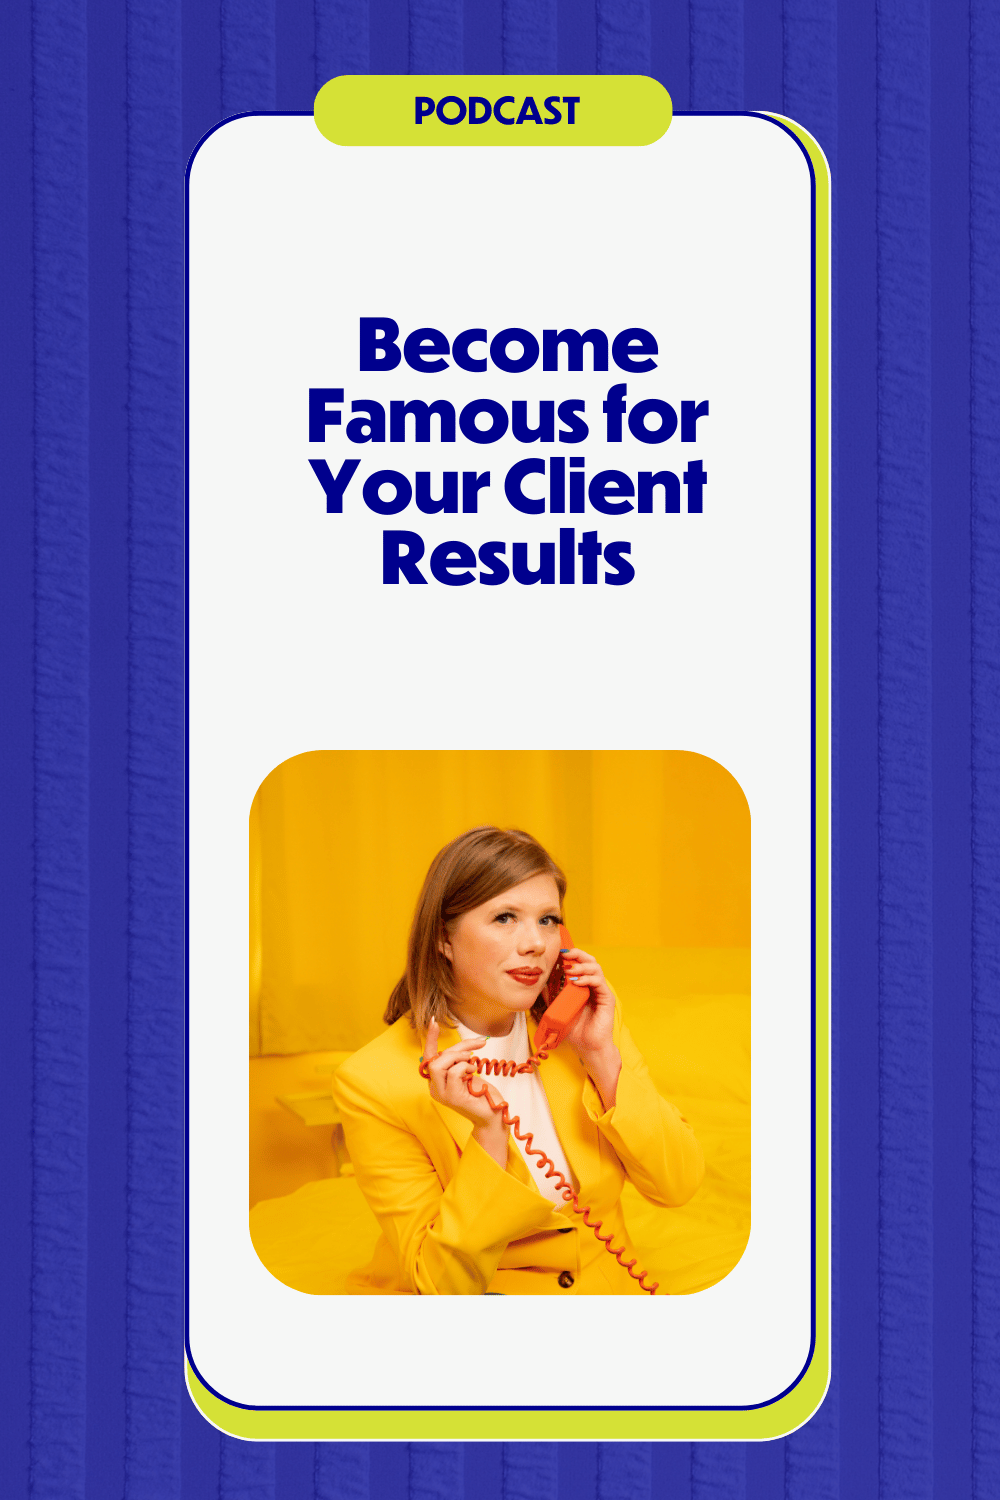 Ashley Rose, a Systems and Airtable Expert, in a yellow suit holding a red phone, titled "Become Famous for Your Client Results."